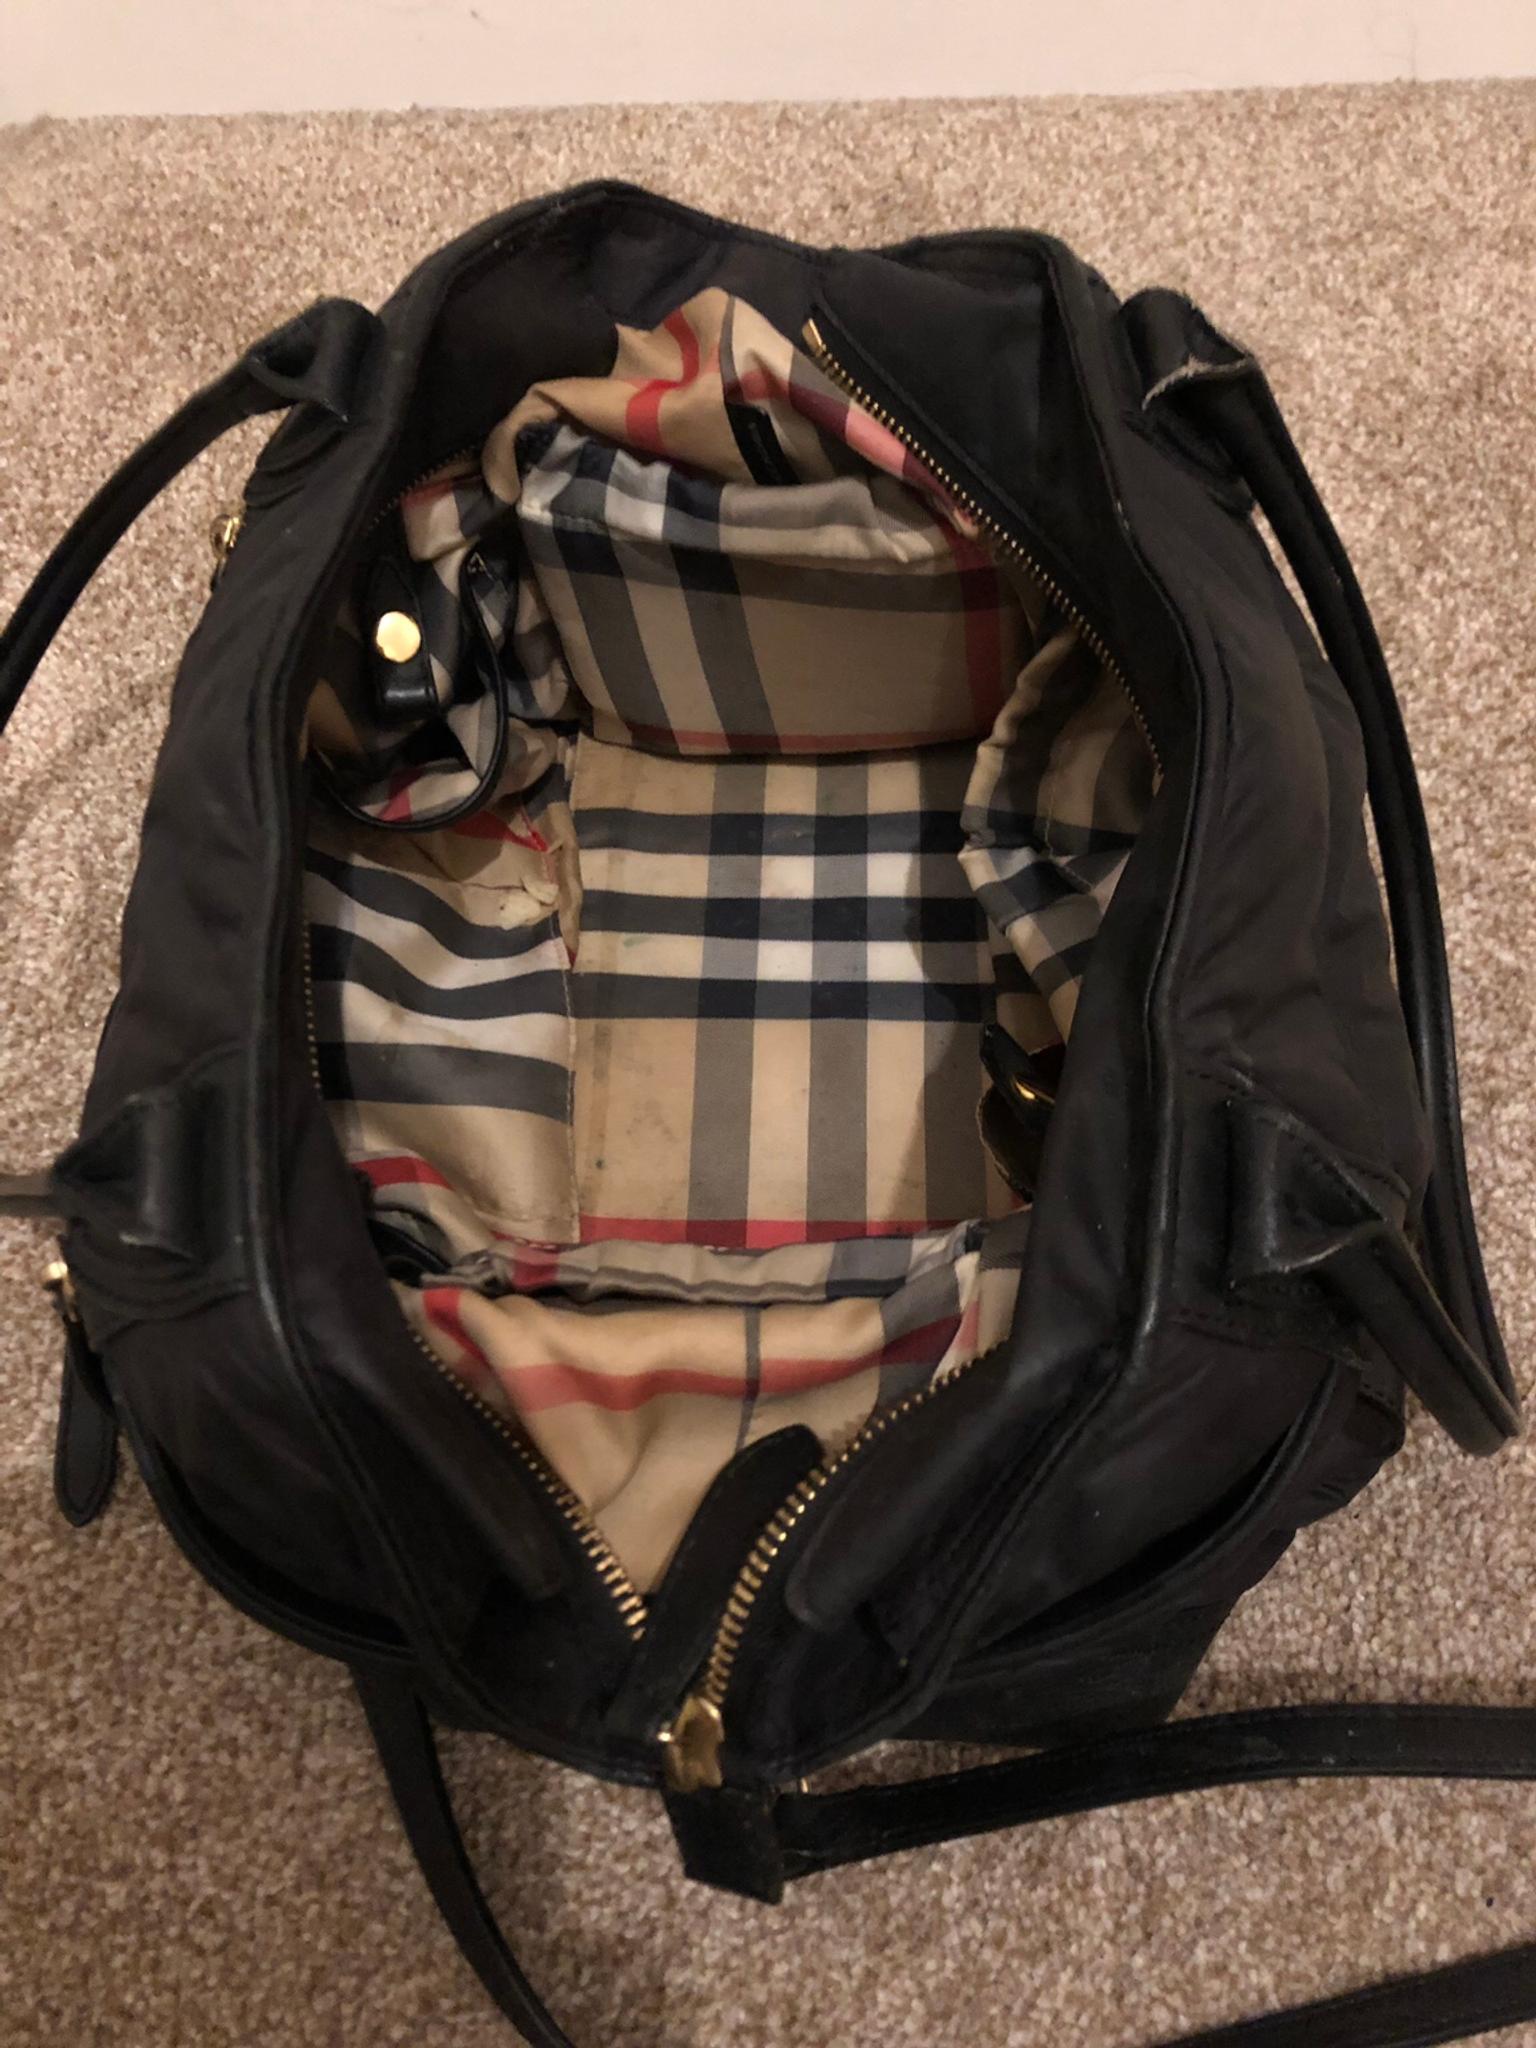 burberry changing backpack